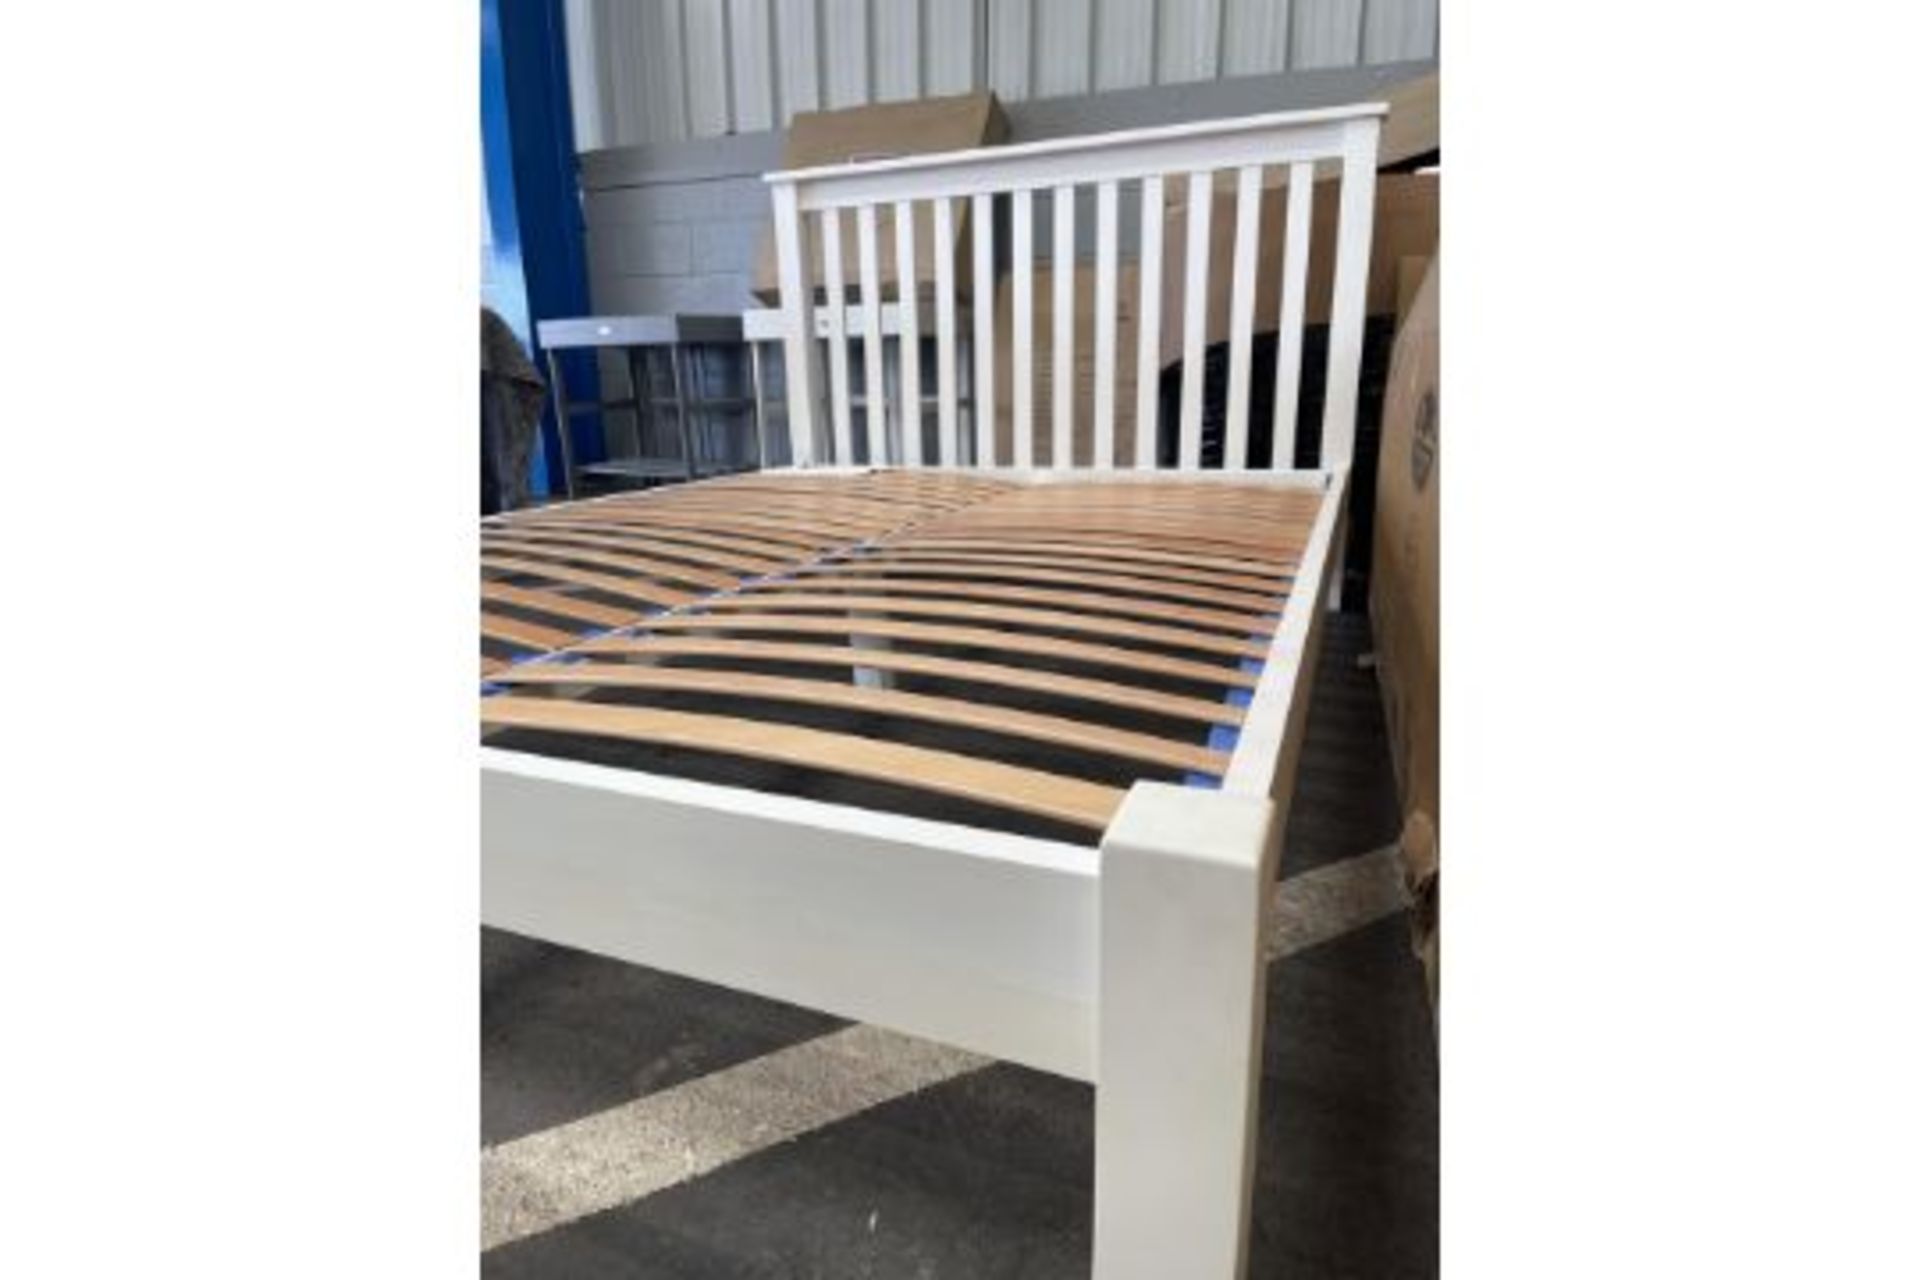 New Dunelm 5ft Kingsize White Solid Wood Bed Frame (3 boxes) - RRP £499.99. - Image 2 of 2